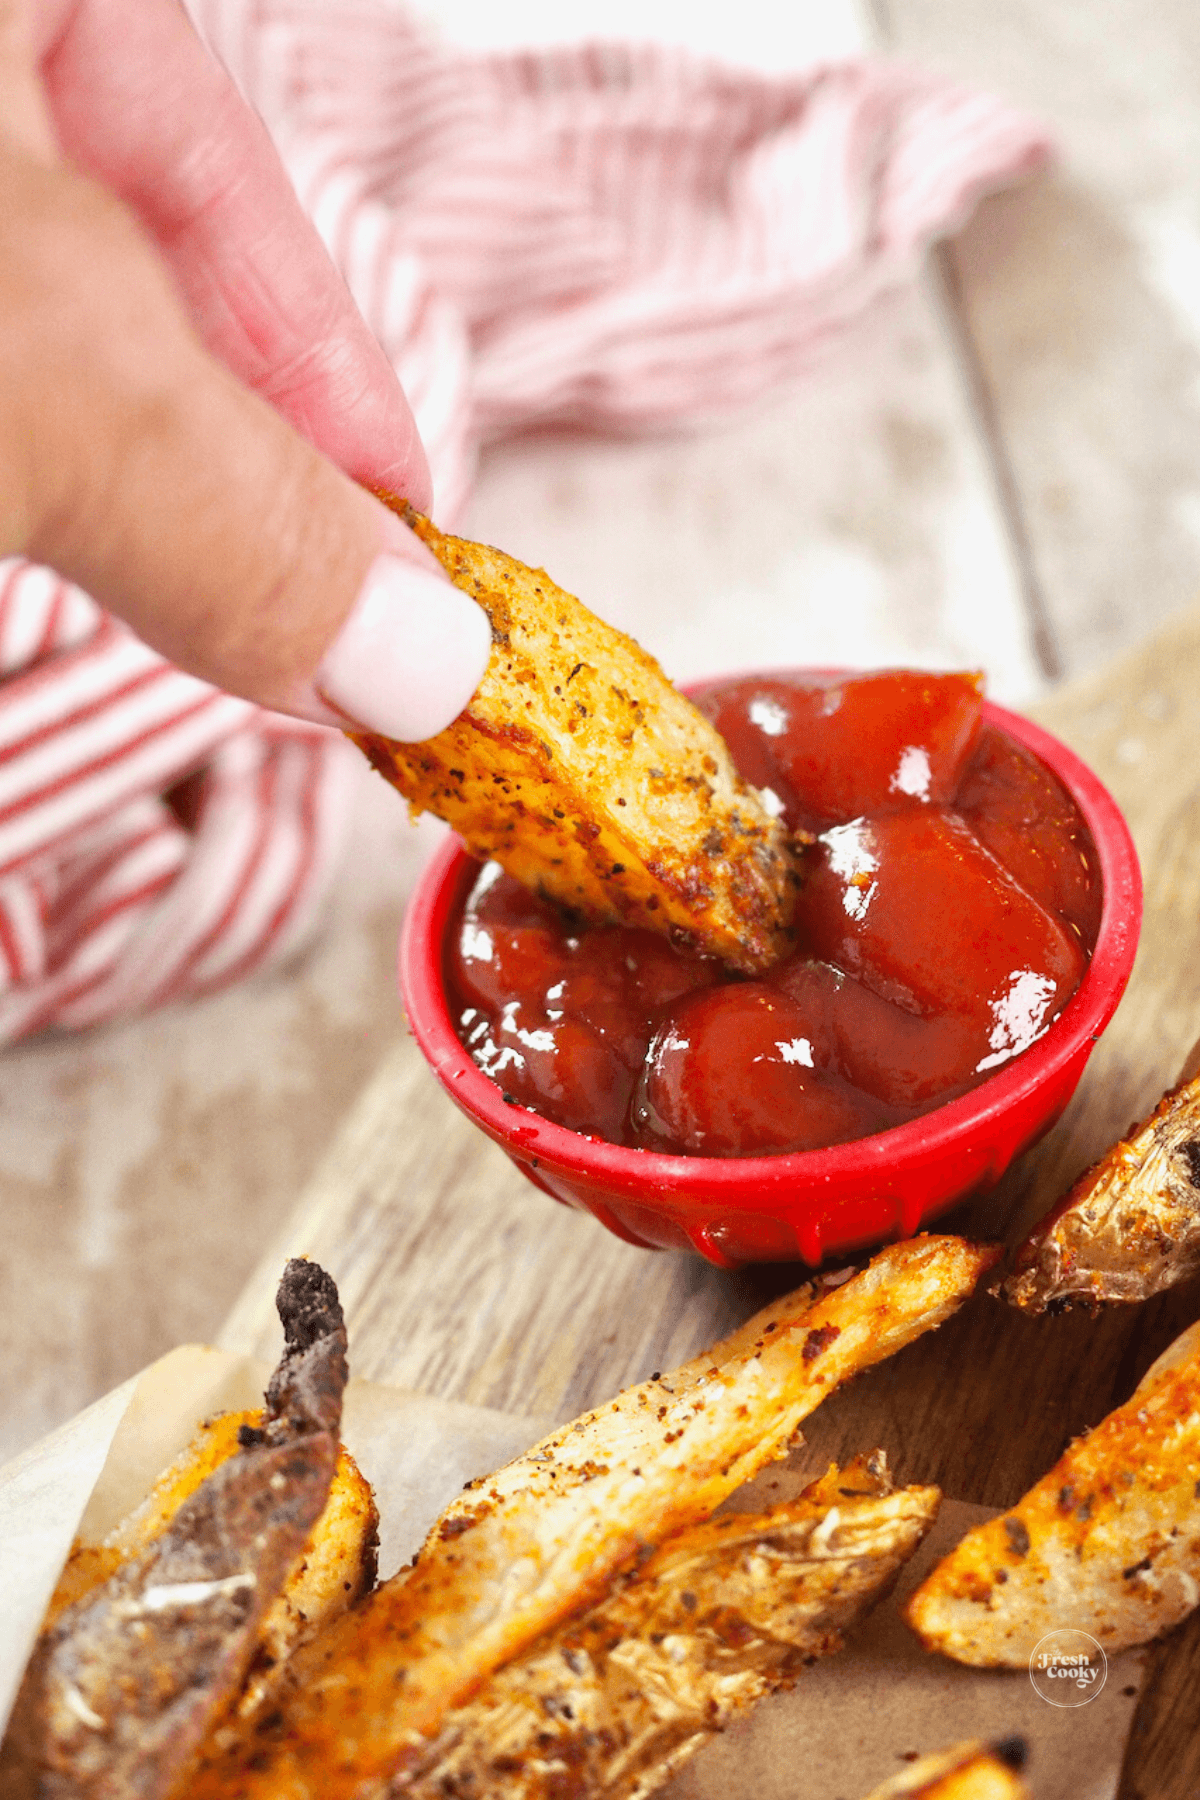 Hand dipping fry into ketchup.